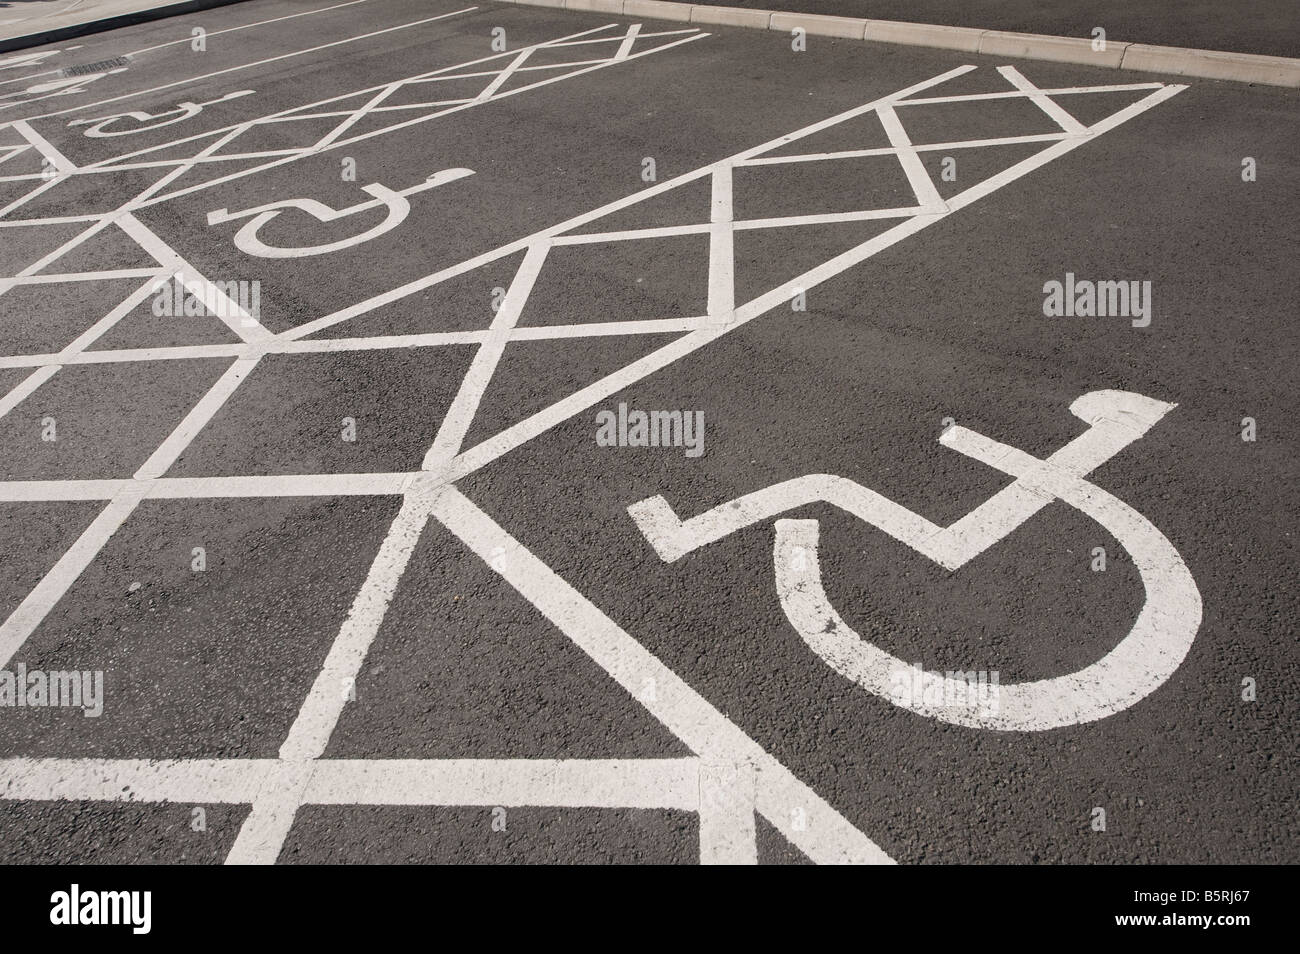 Empty parking spaces reserved for disabled drivers cars in a car park in the uk Stock Photo